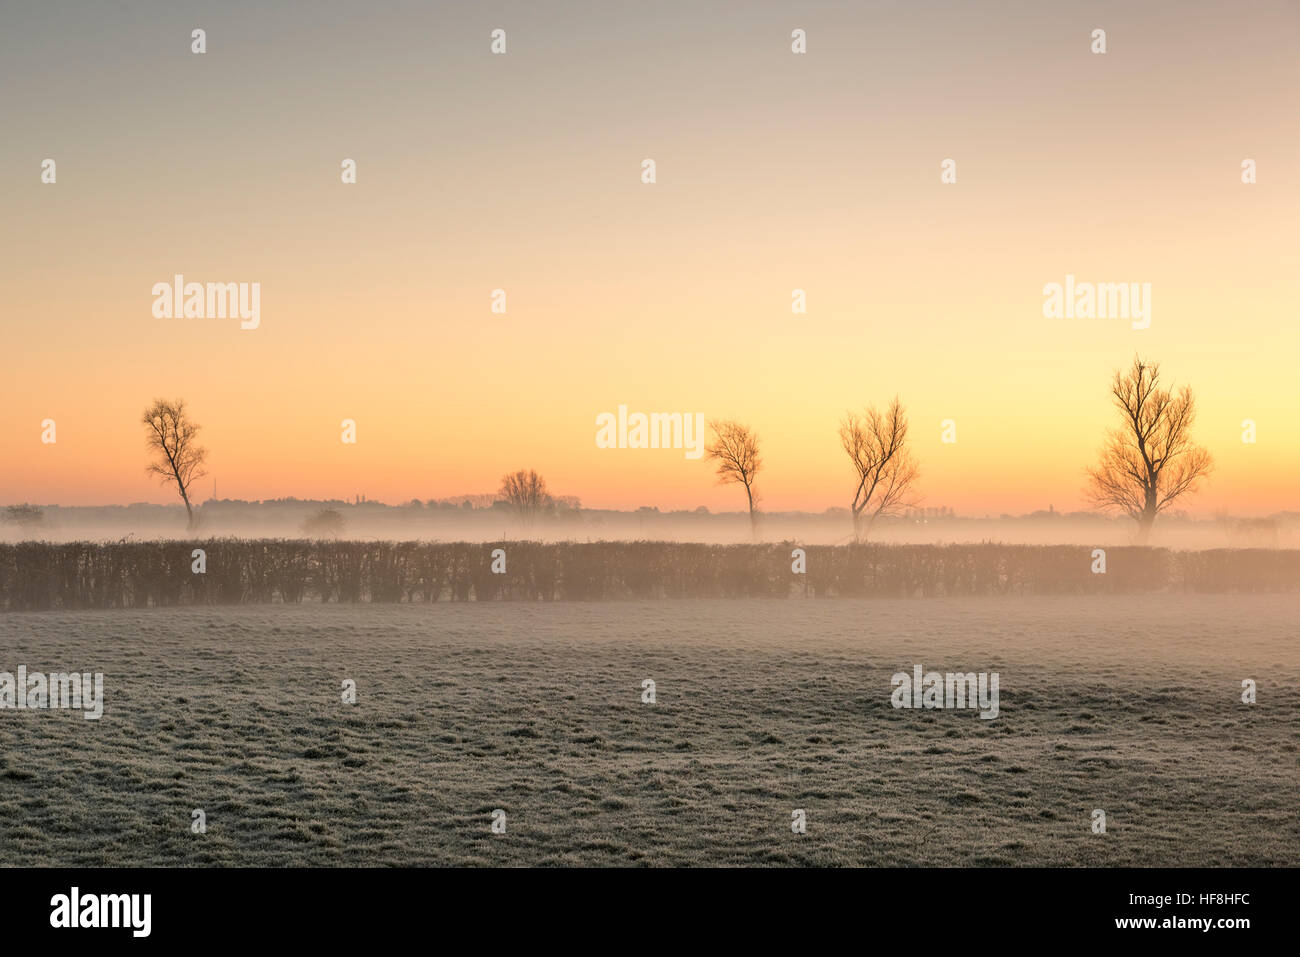 Willingham, Cambridgeshire, UK. 29th Dec, 2016. The sun rises on a frozen Fenland landscape over the Old West River. Temperatures dropped to around minus 4 degrees centigrade overnight with a widespread frost and patchy fog at dawn. © Julian Eales/Alamy Live News Stock Photo